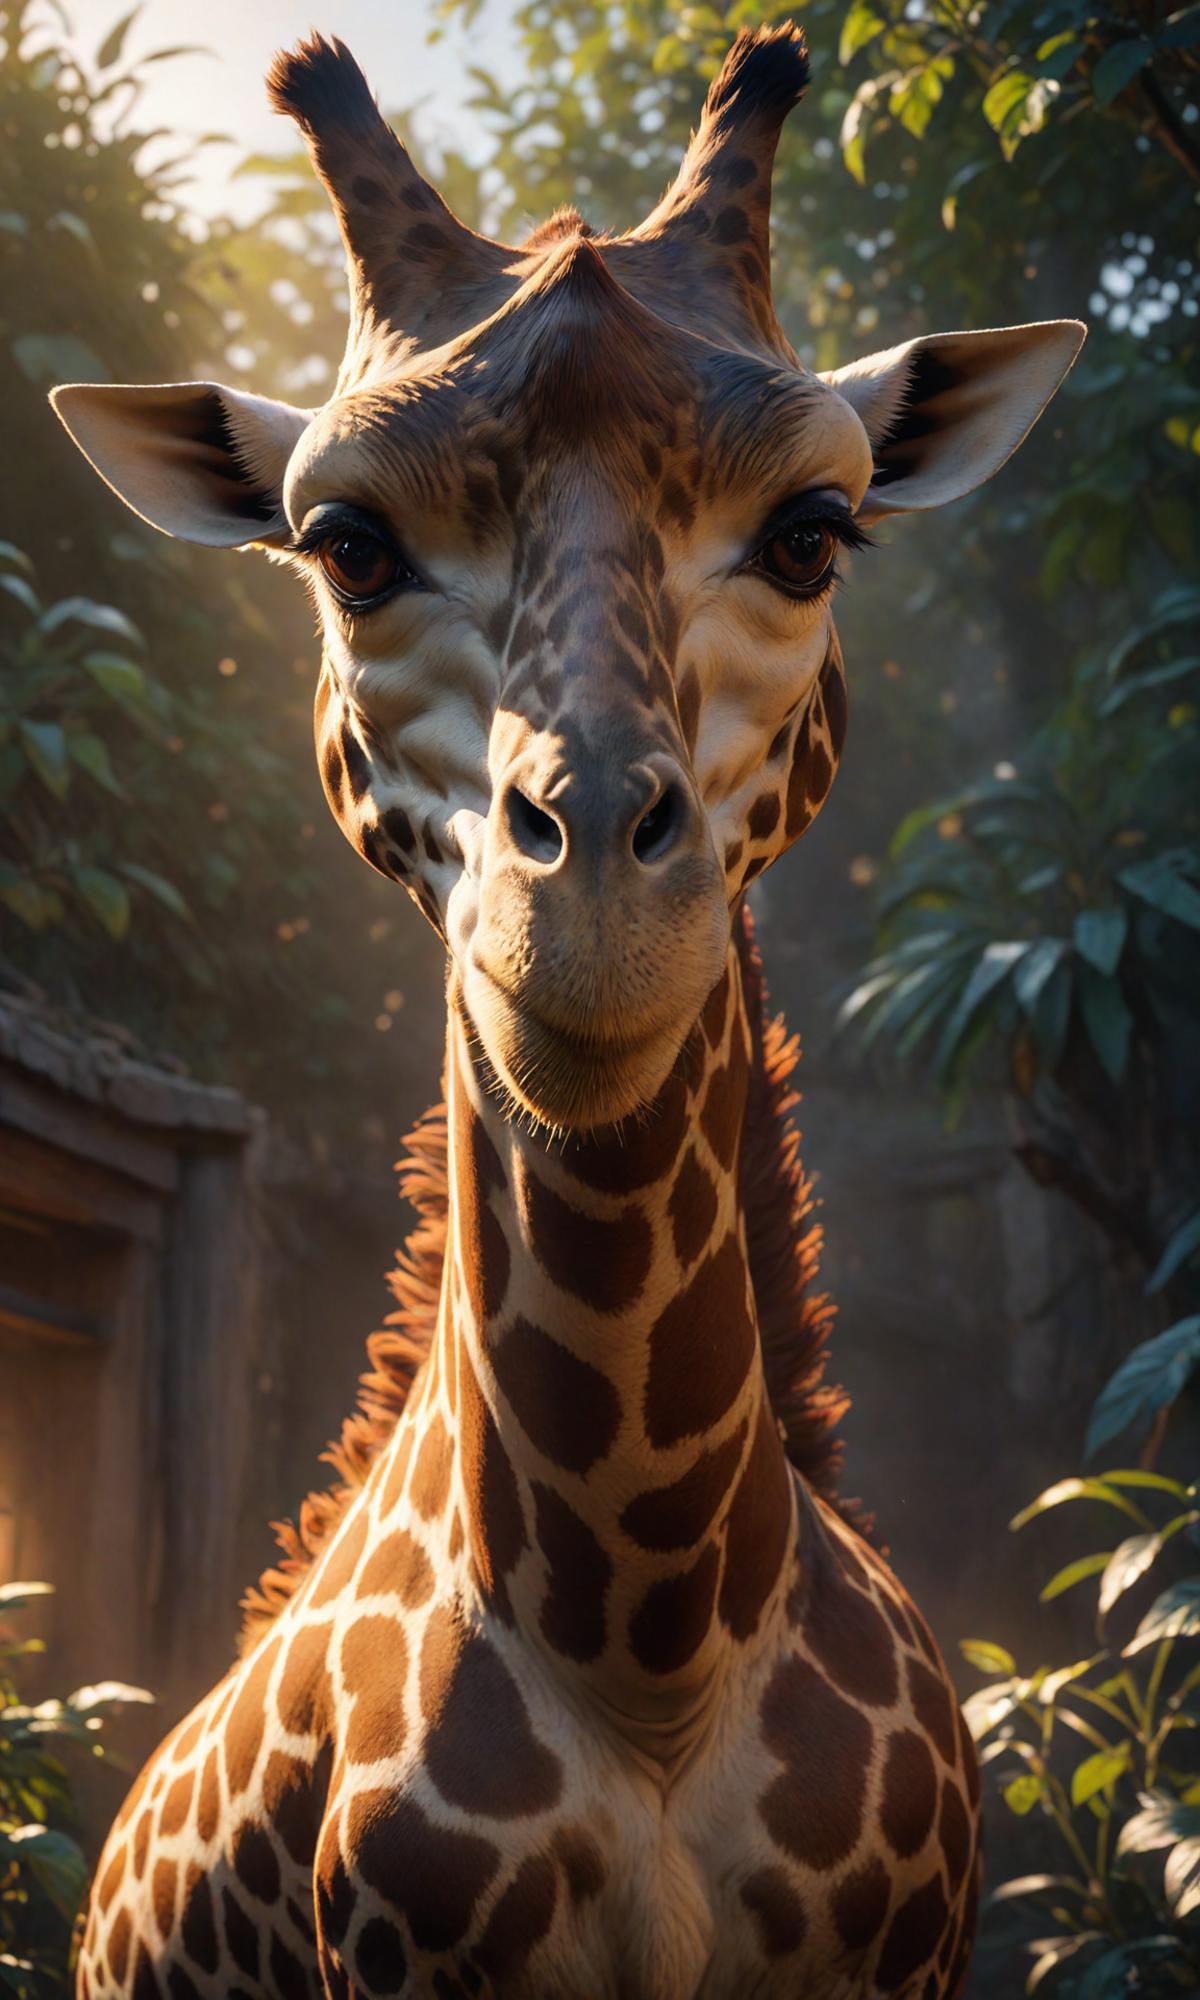 Close-up of a giraffe's face with a sunlit background.